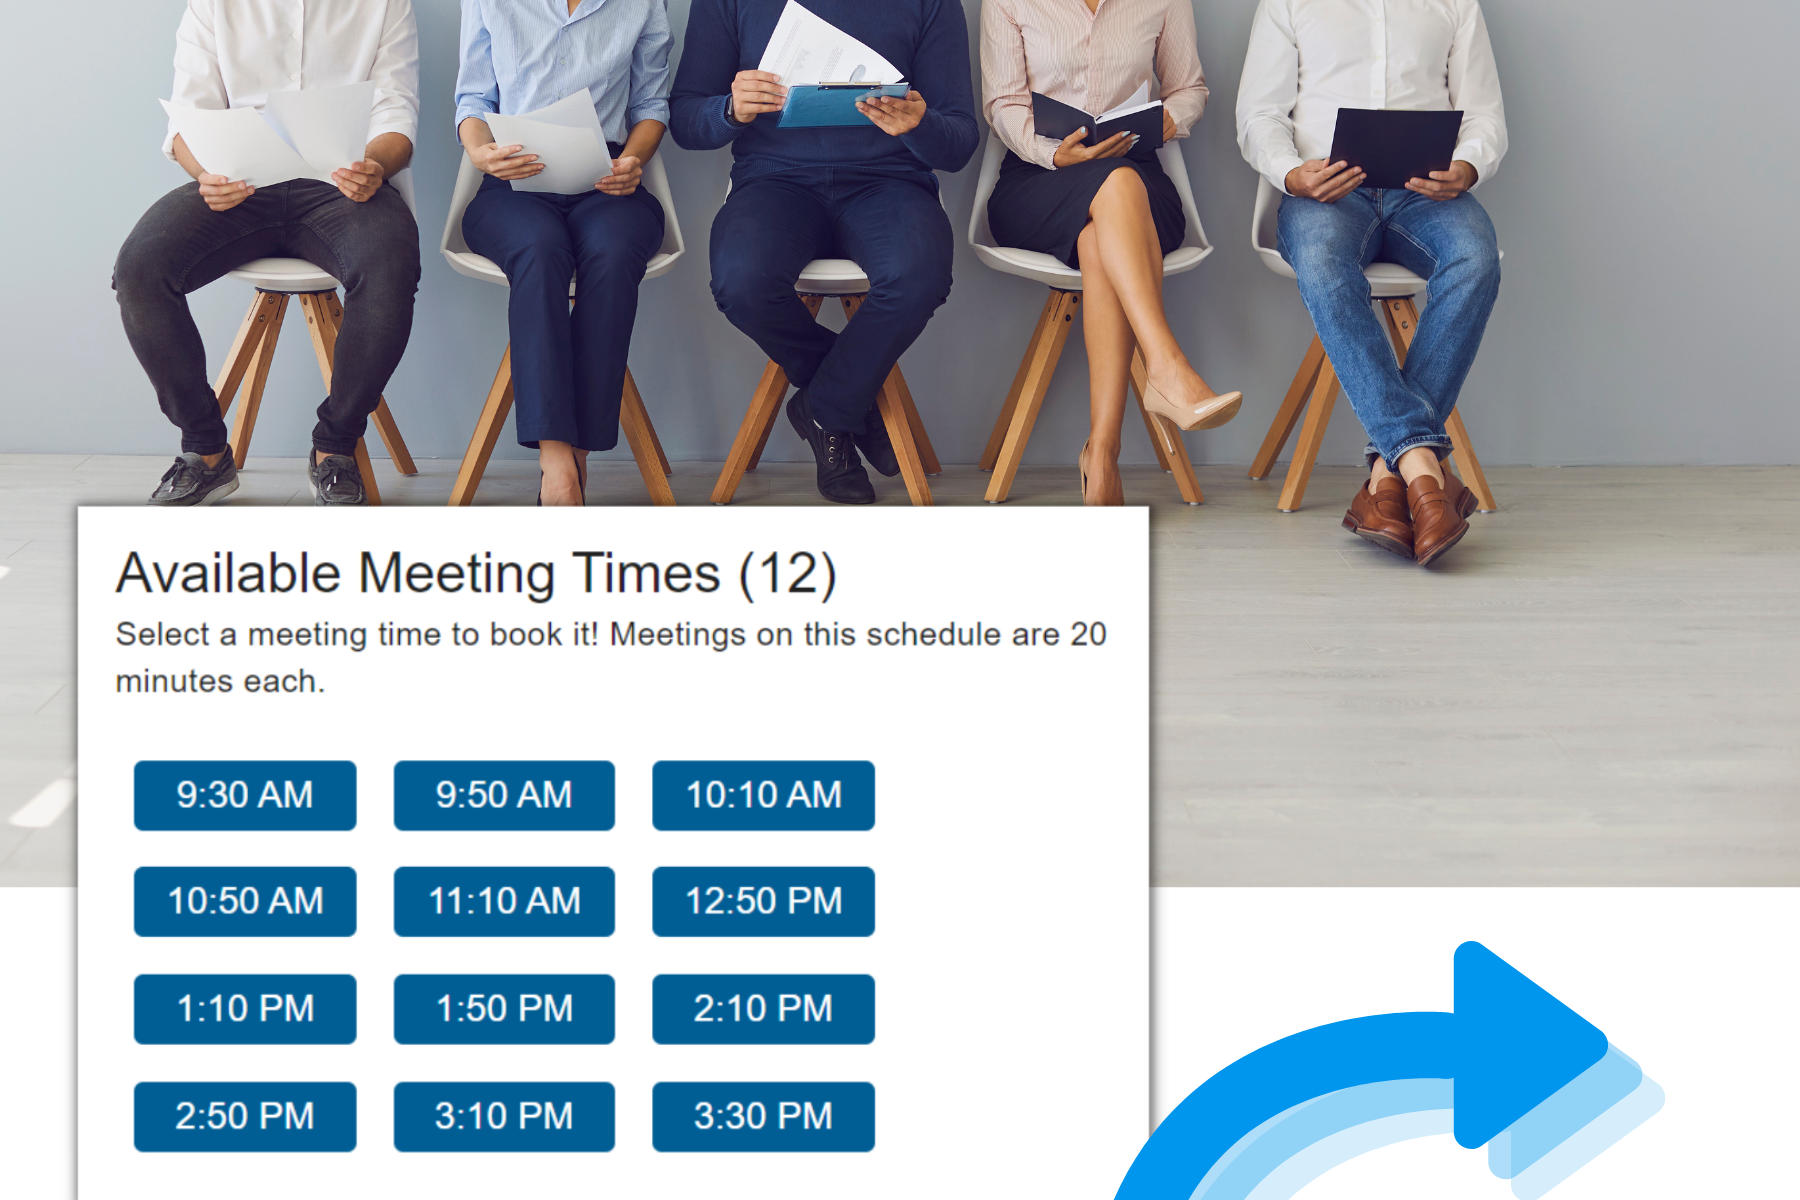 Skip the Lines at In-person Recruiting Events with Meetings